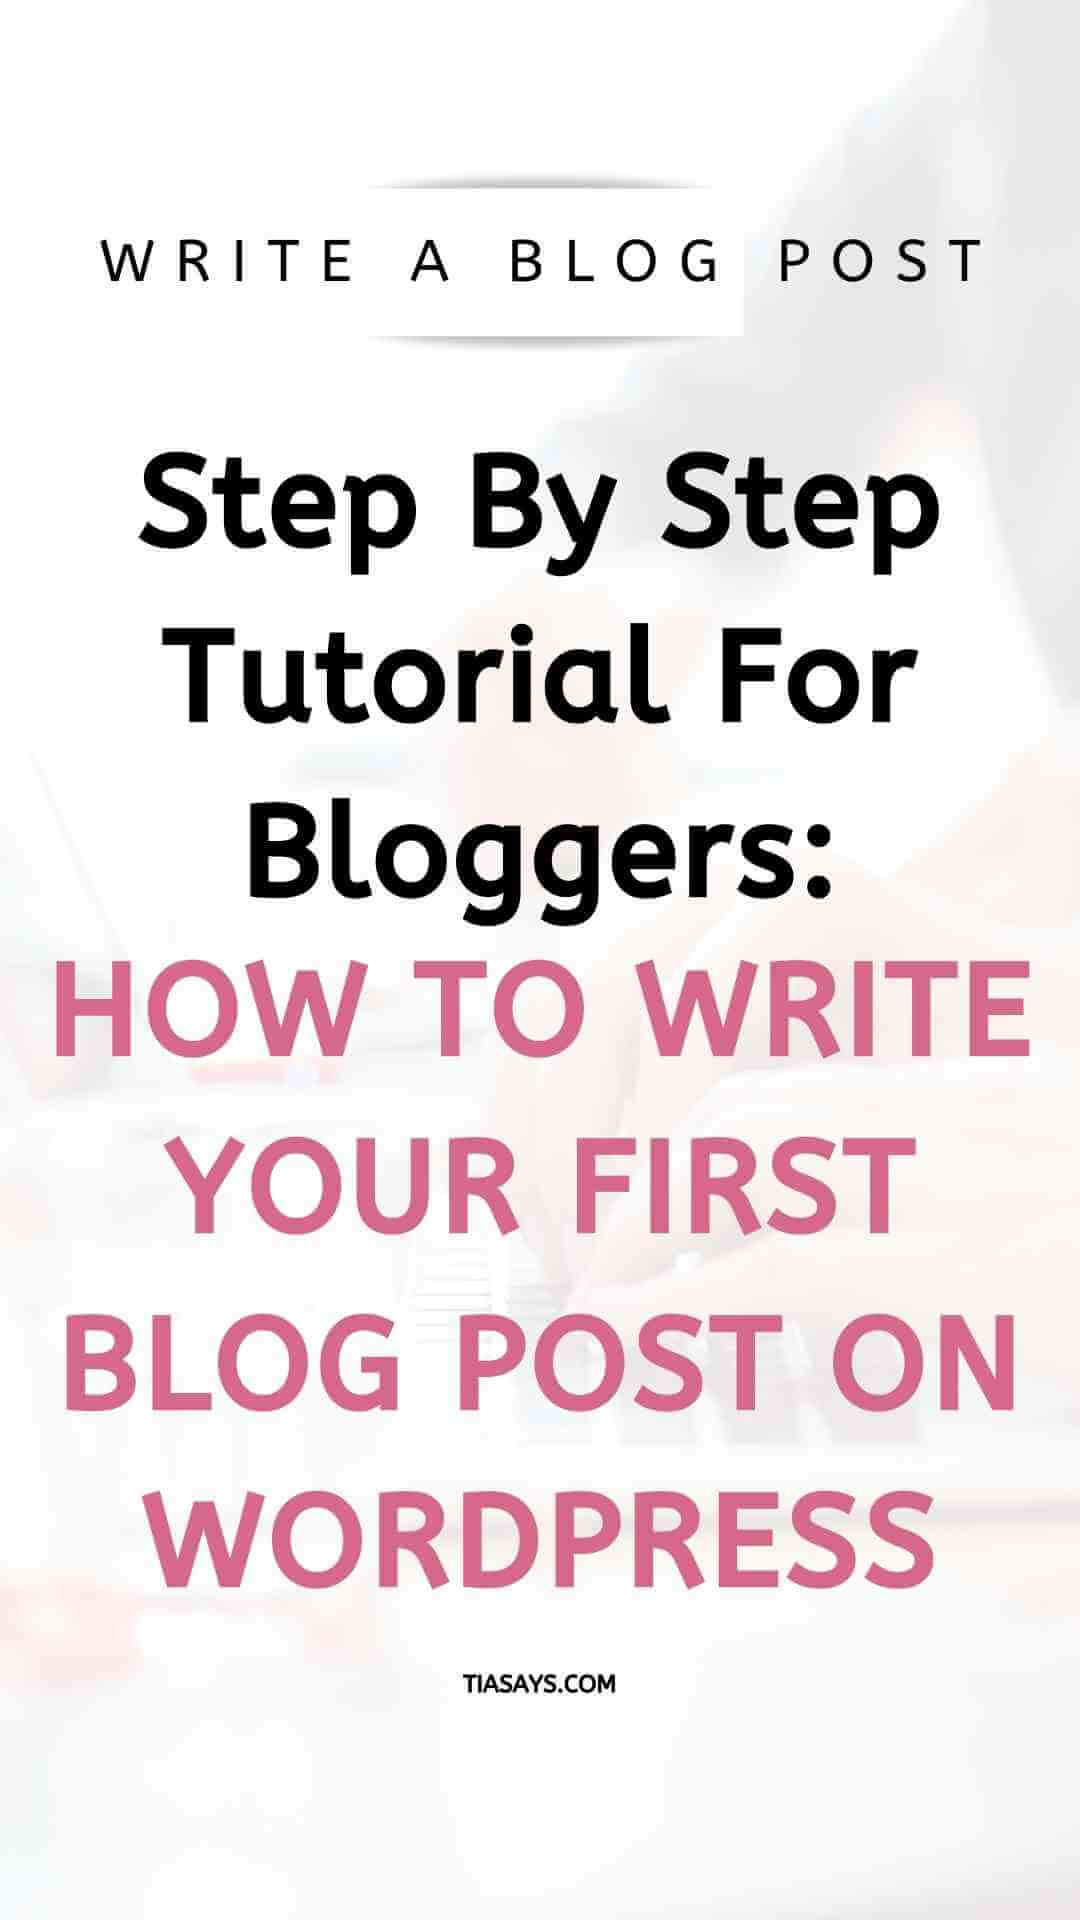 step by step tutorial on how to write your first blog post on wordpress